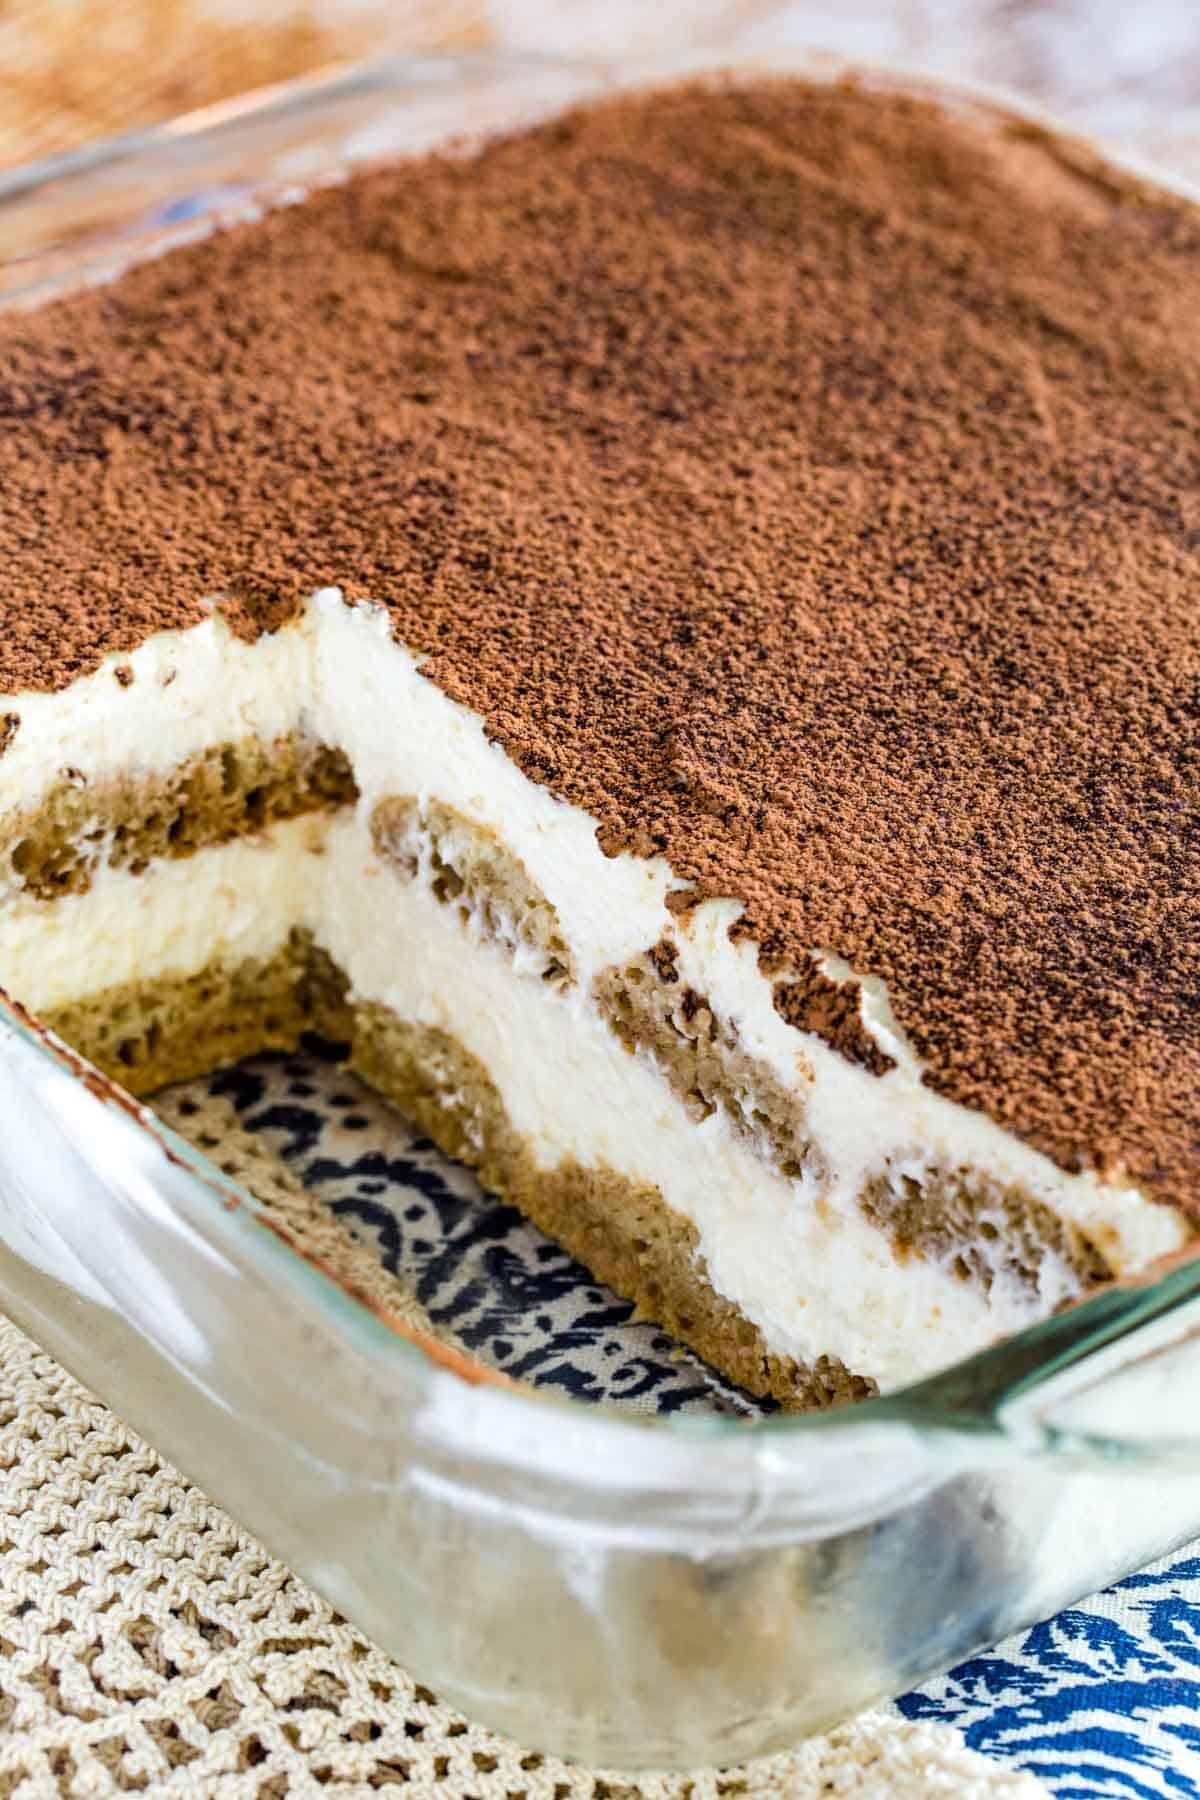 Gluten-free tiramisu dusted with cocoa powder inside a glass baking dish, with two servings missing.